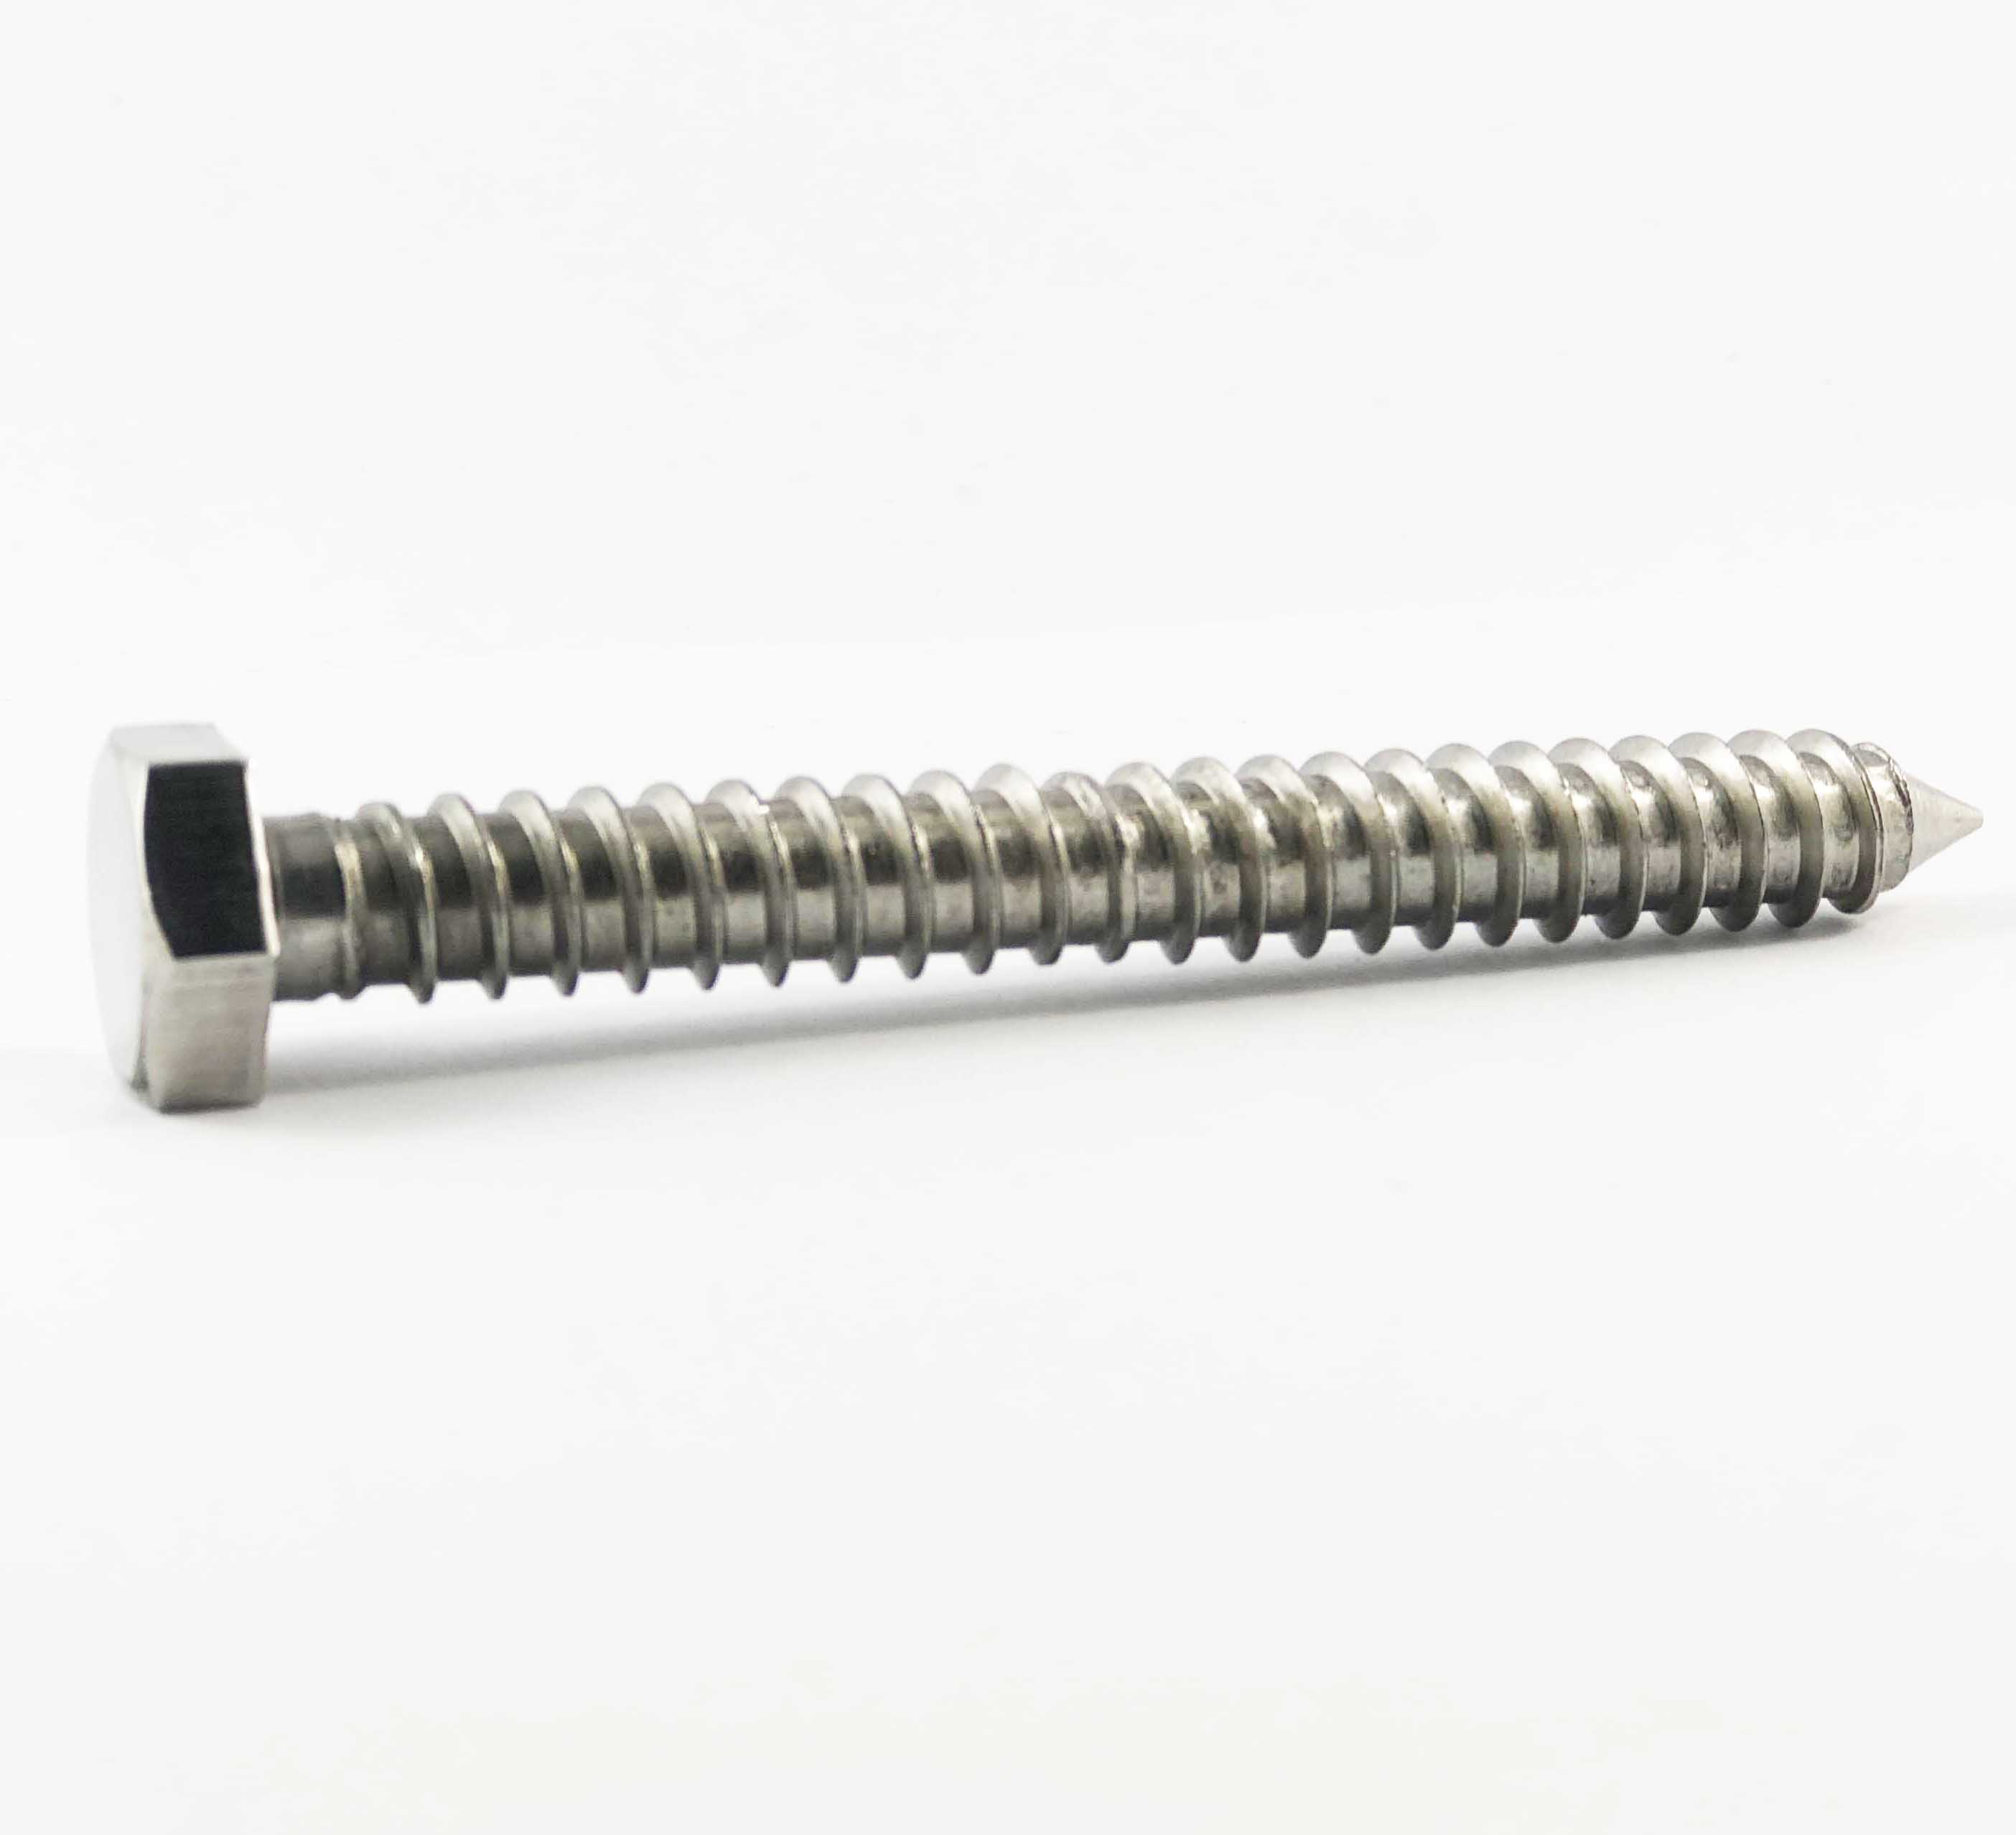 Coach Screw Bolt M10x100mm  Stainless Steel